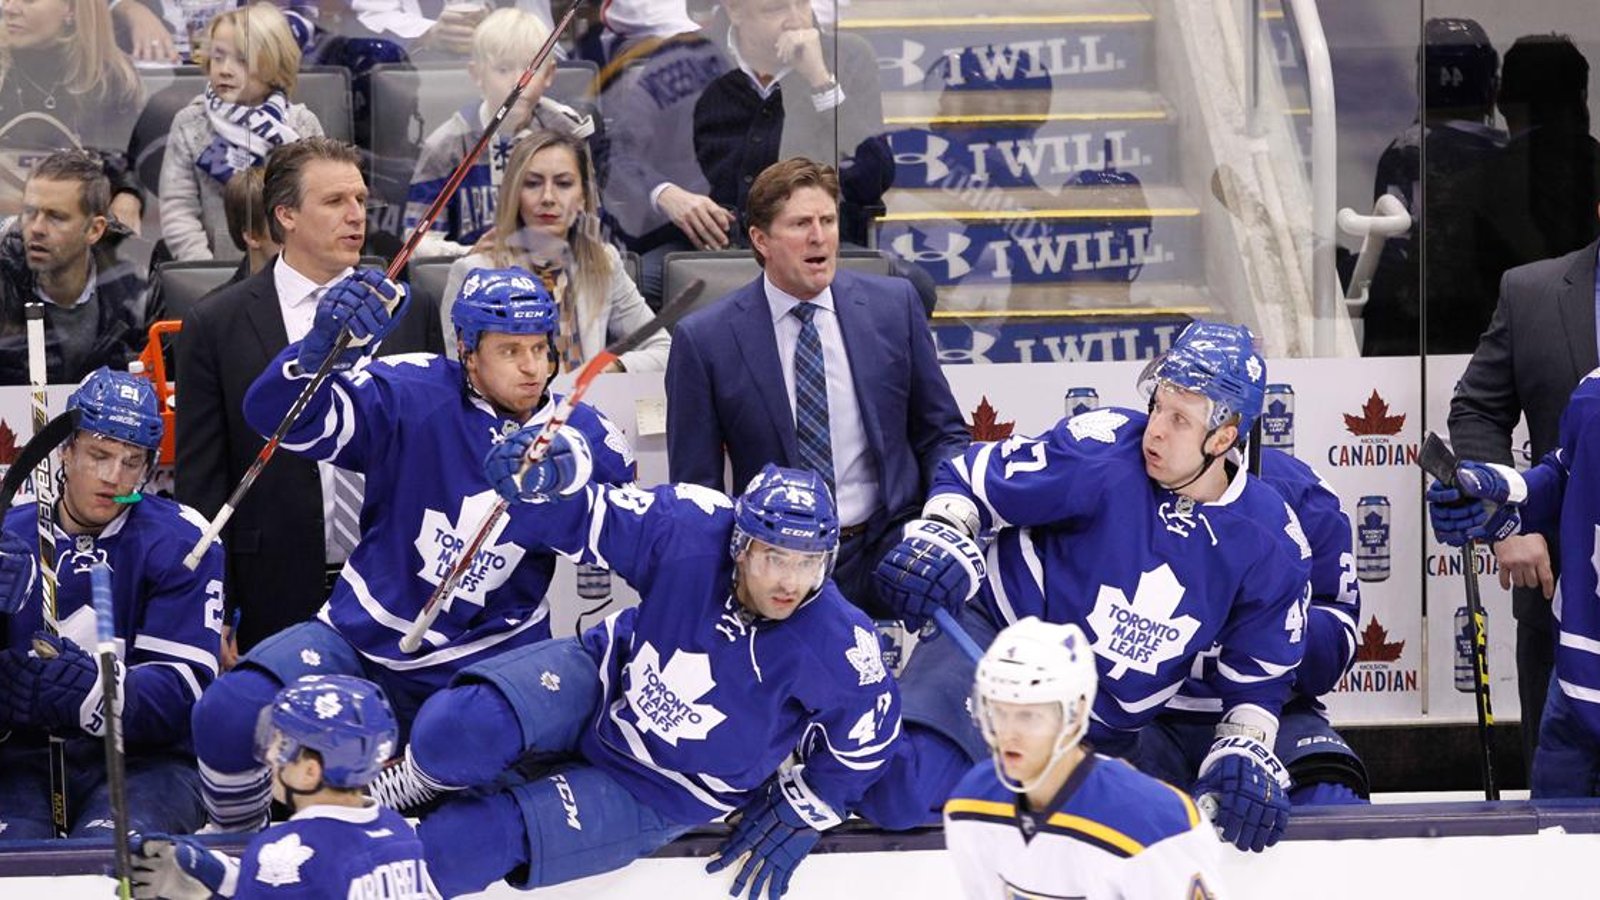 Approaching Playoffs, Leafs are confident, pumped up! 